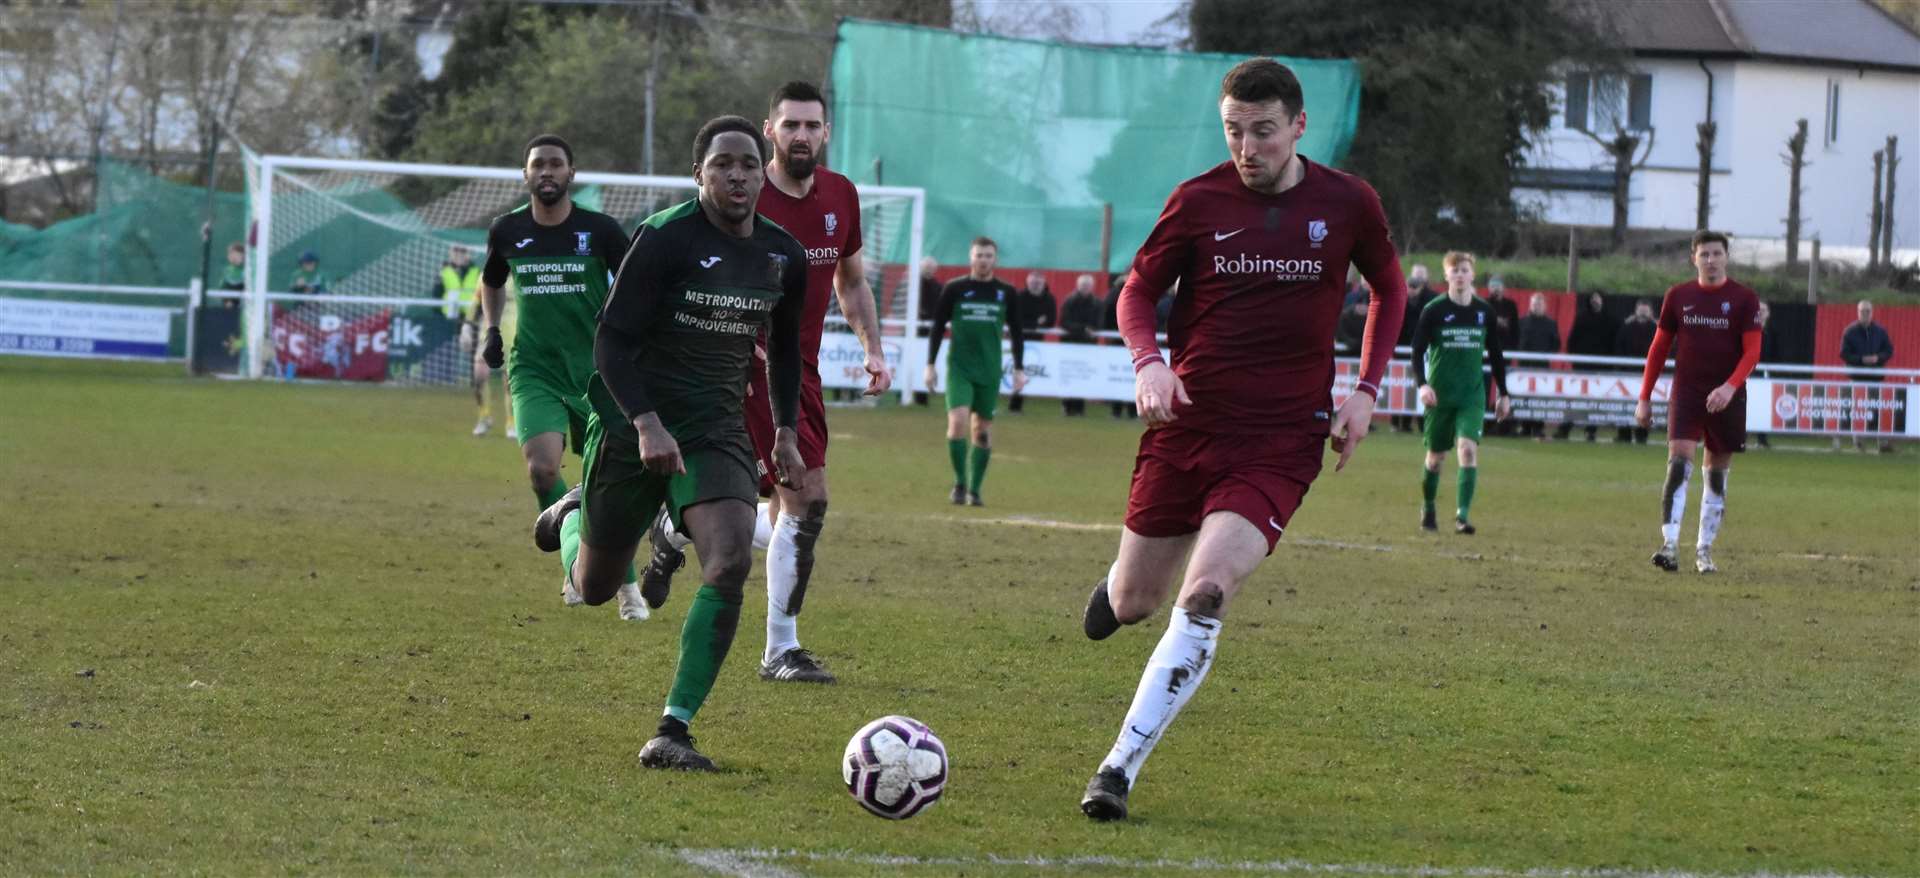 Canterbury defender Ben Gorham gives chase against Cray Valley Picture: Alan Coomes